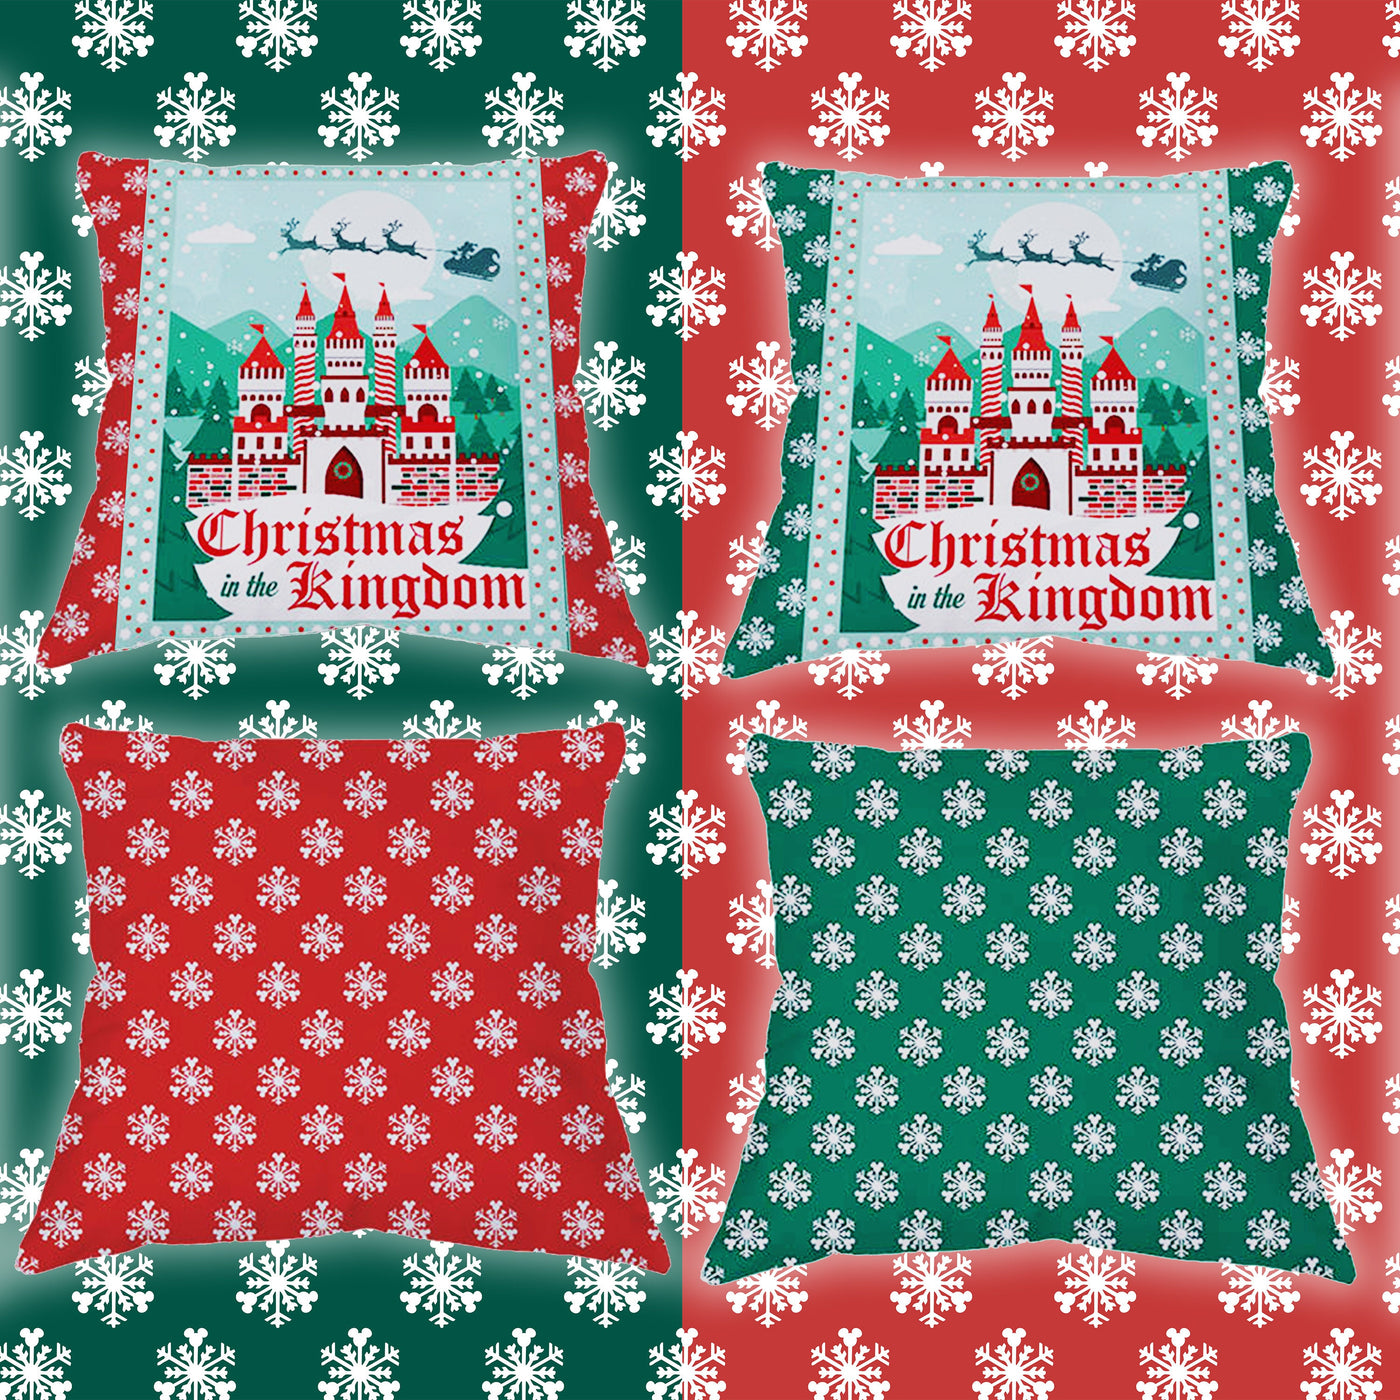 Christmas in the Kingdom Pillow Covers / Cases (2 Per Order)